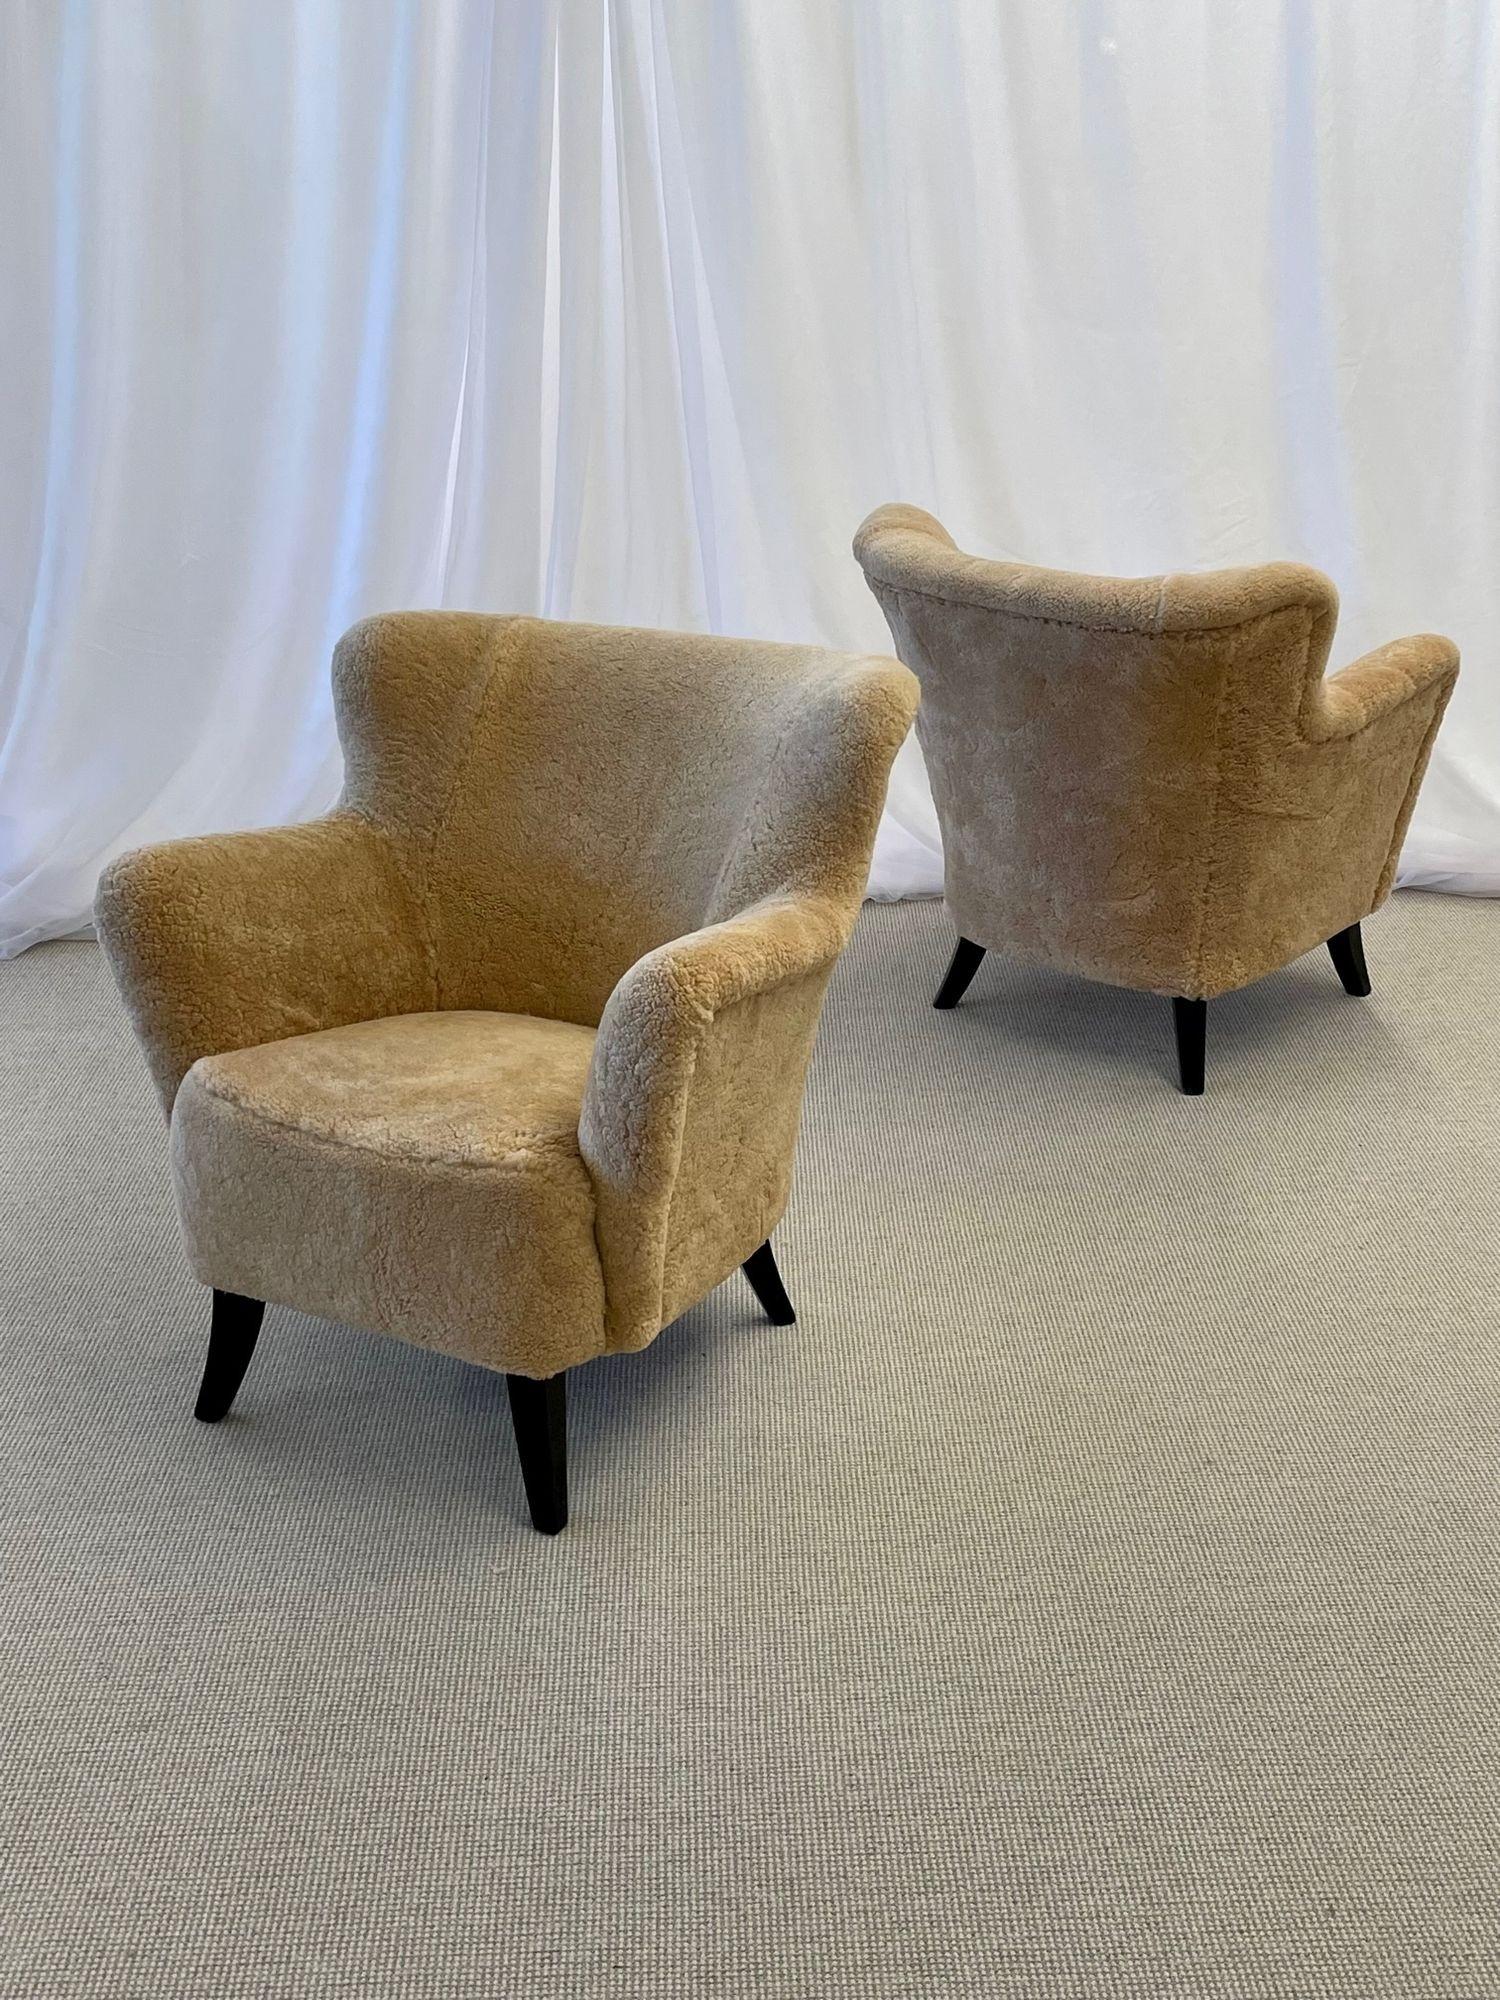 Danish Mid-Century Modern, Lounge Chairs, Sheepskin, Ebonized Wood, 1950s In Good Condition For Sale In Stamford, CT